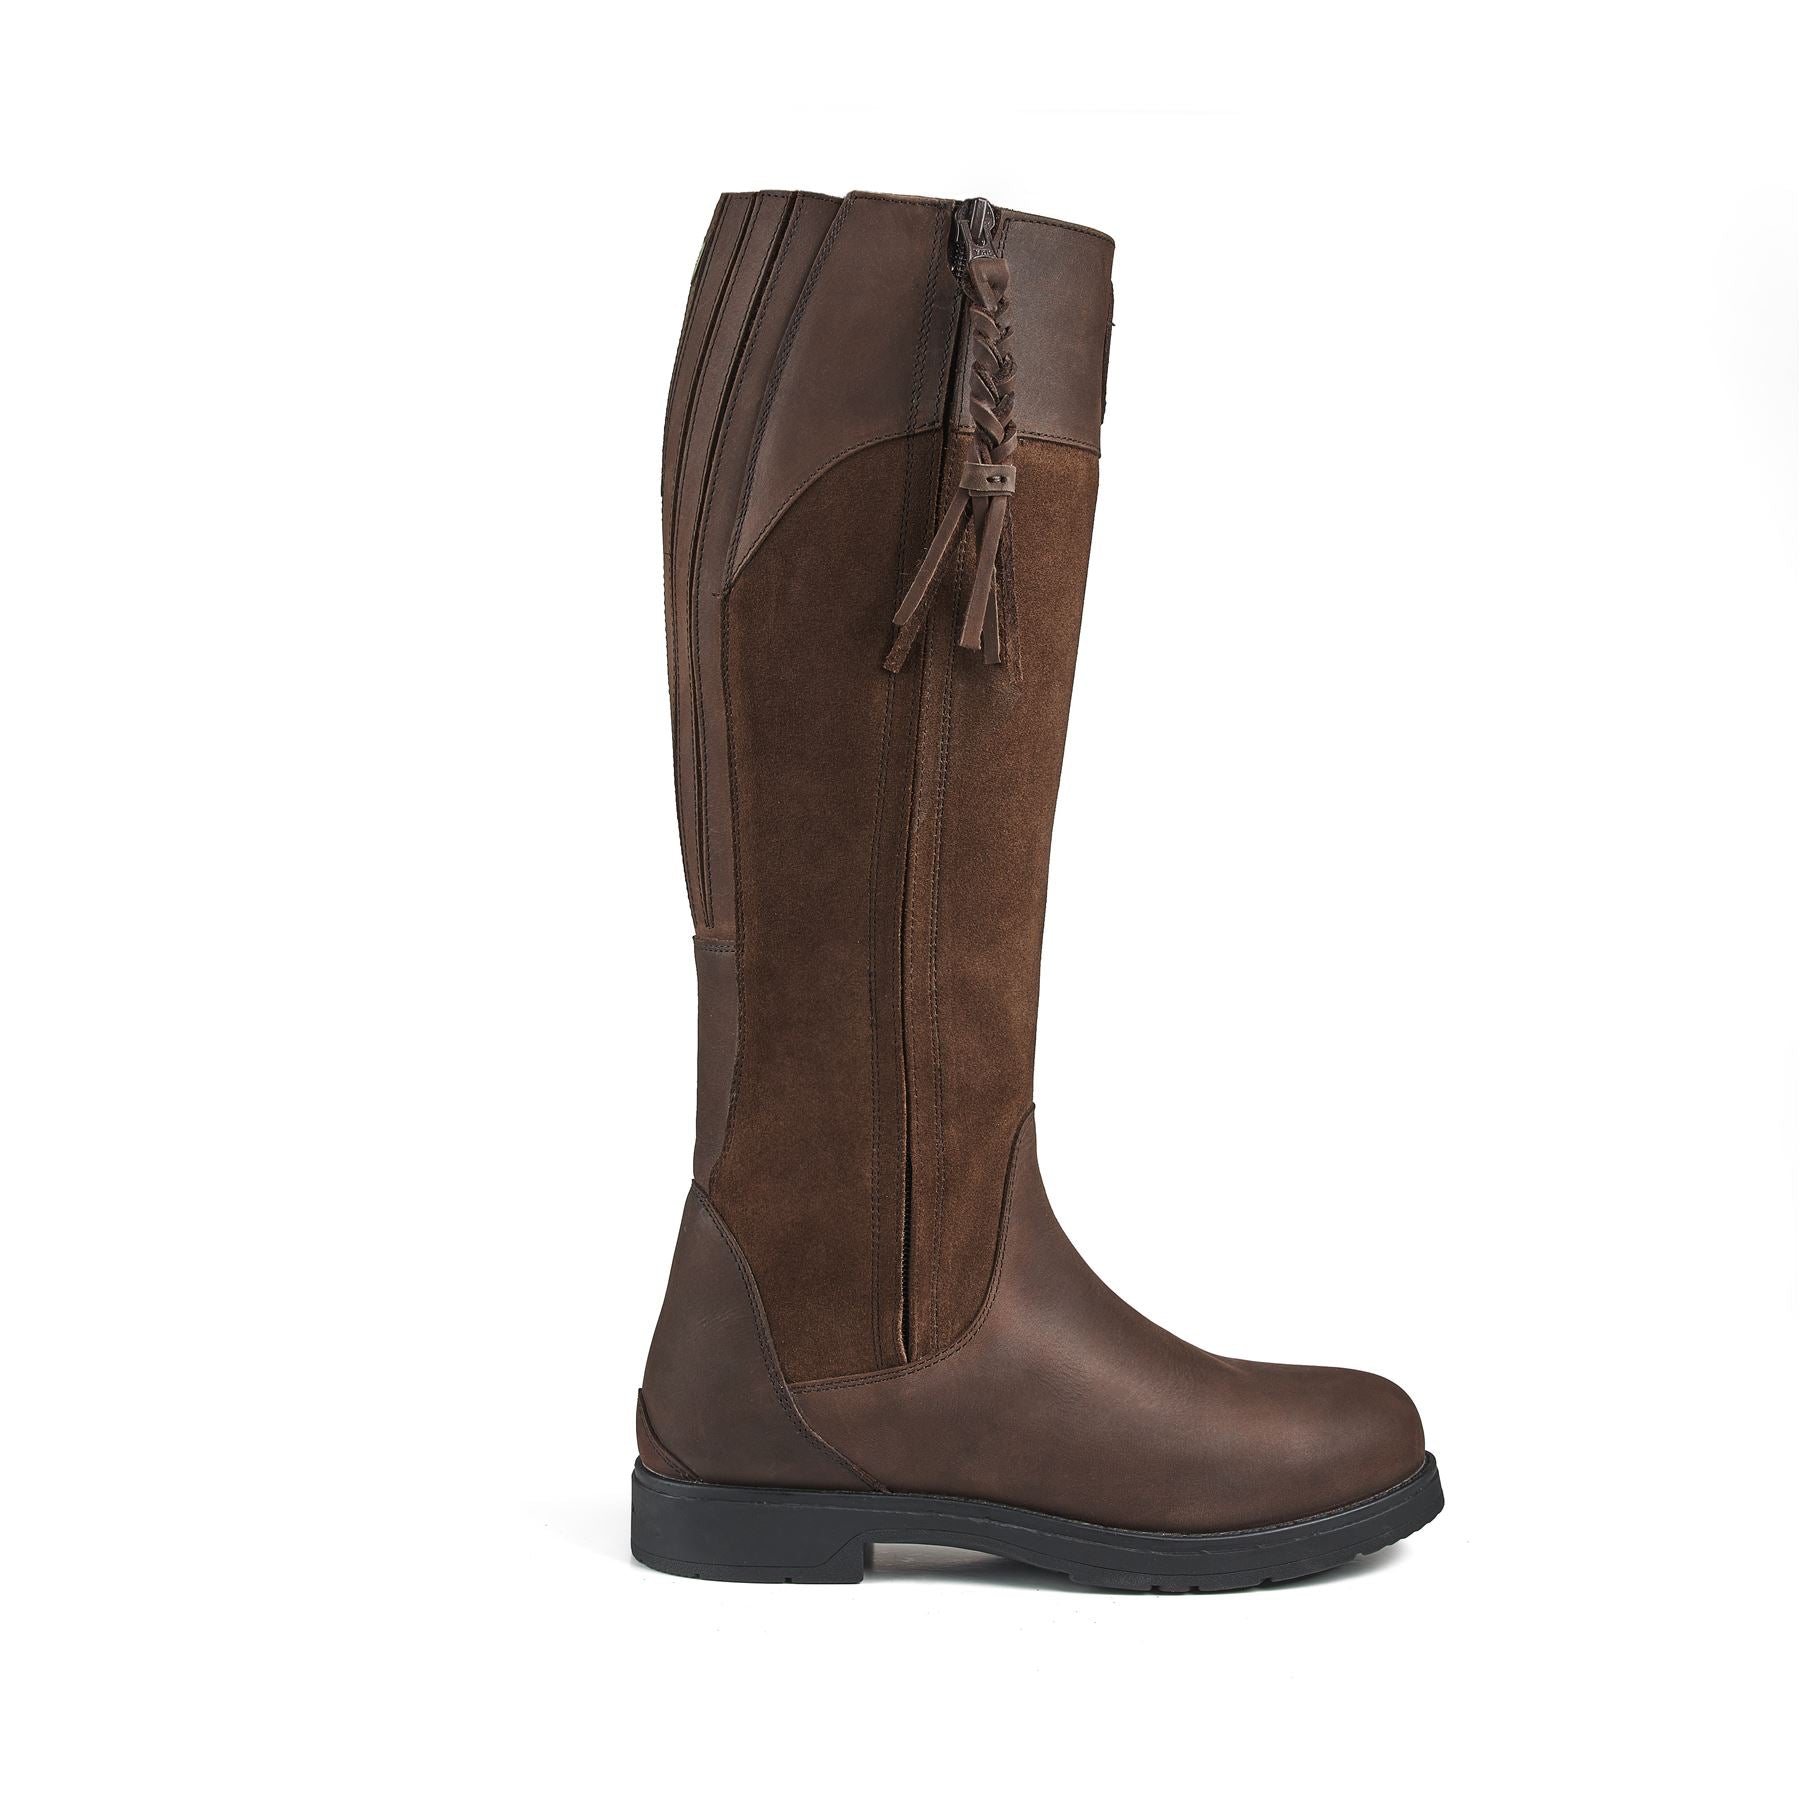 Shires Moretta Varallo Country Boots - Childs - Just Horse Riders